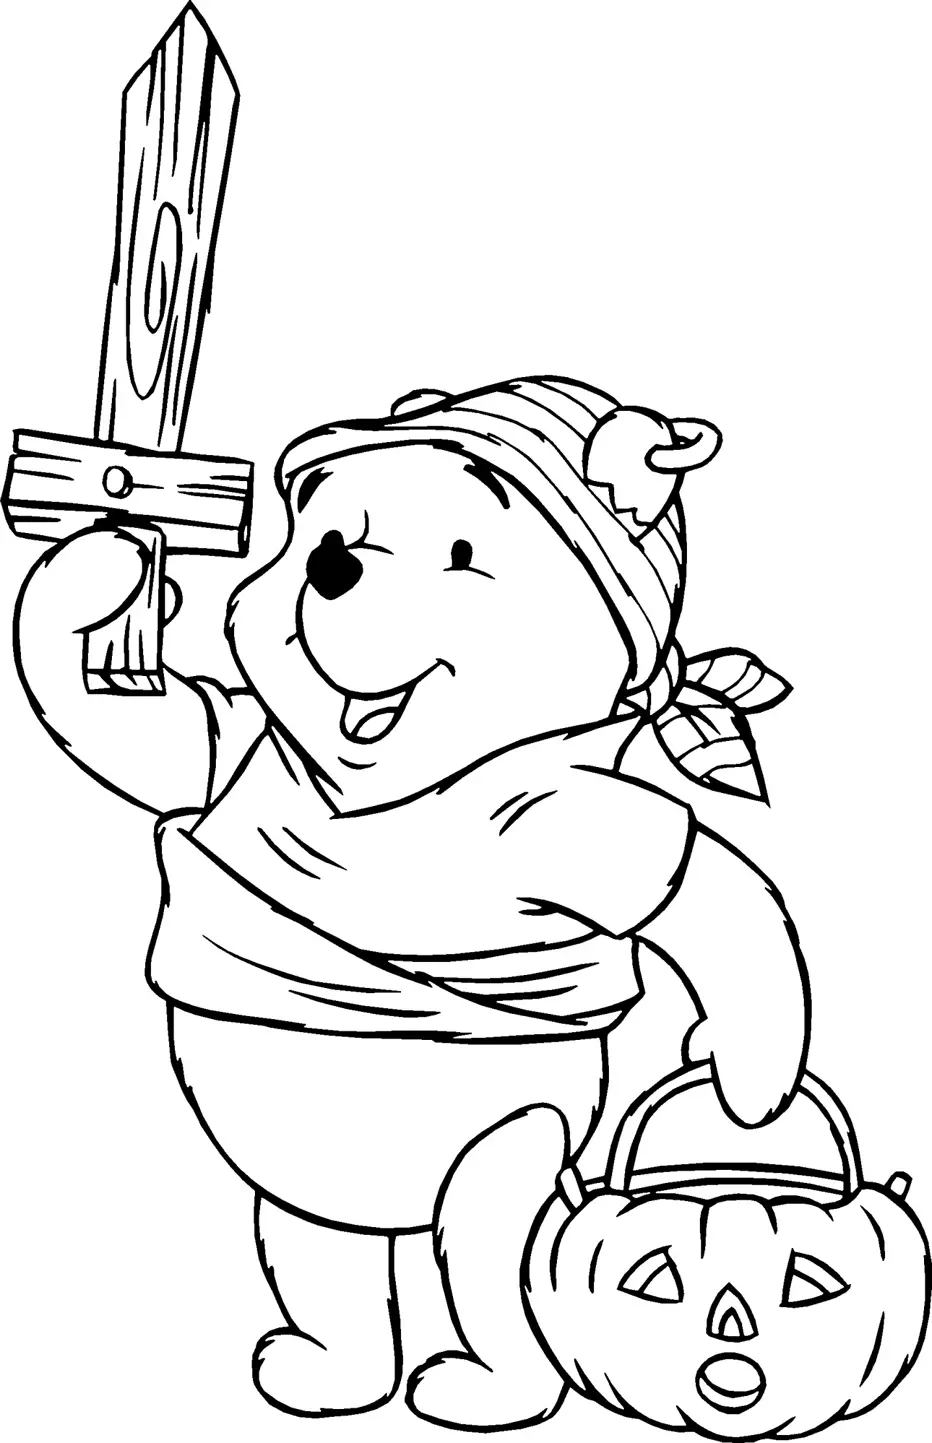 Pooh Bear Coloring Pages 8